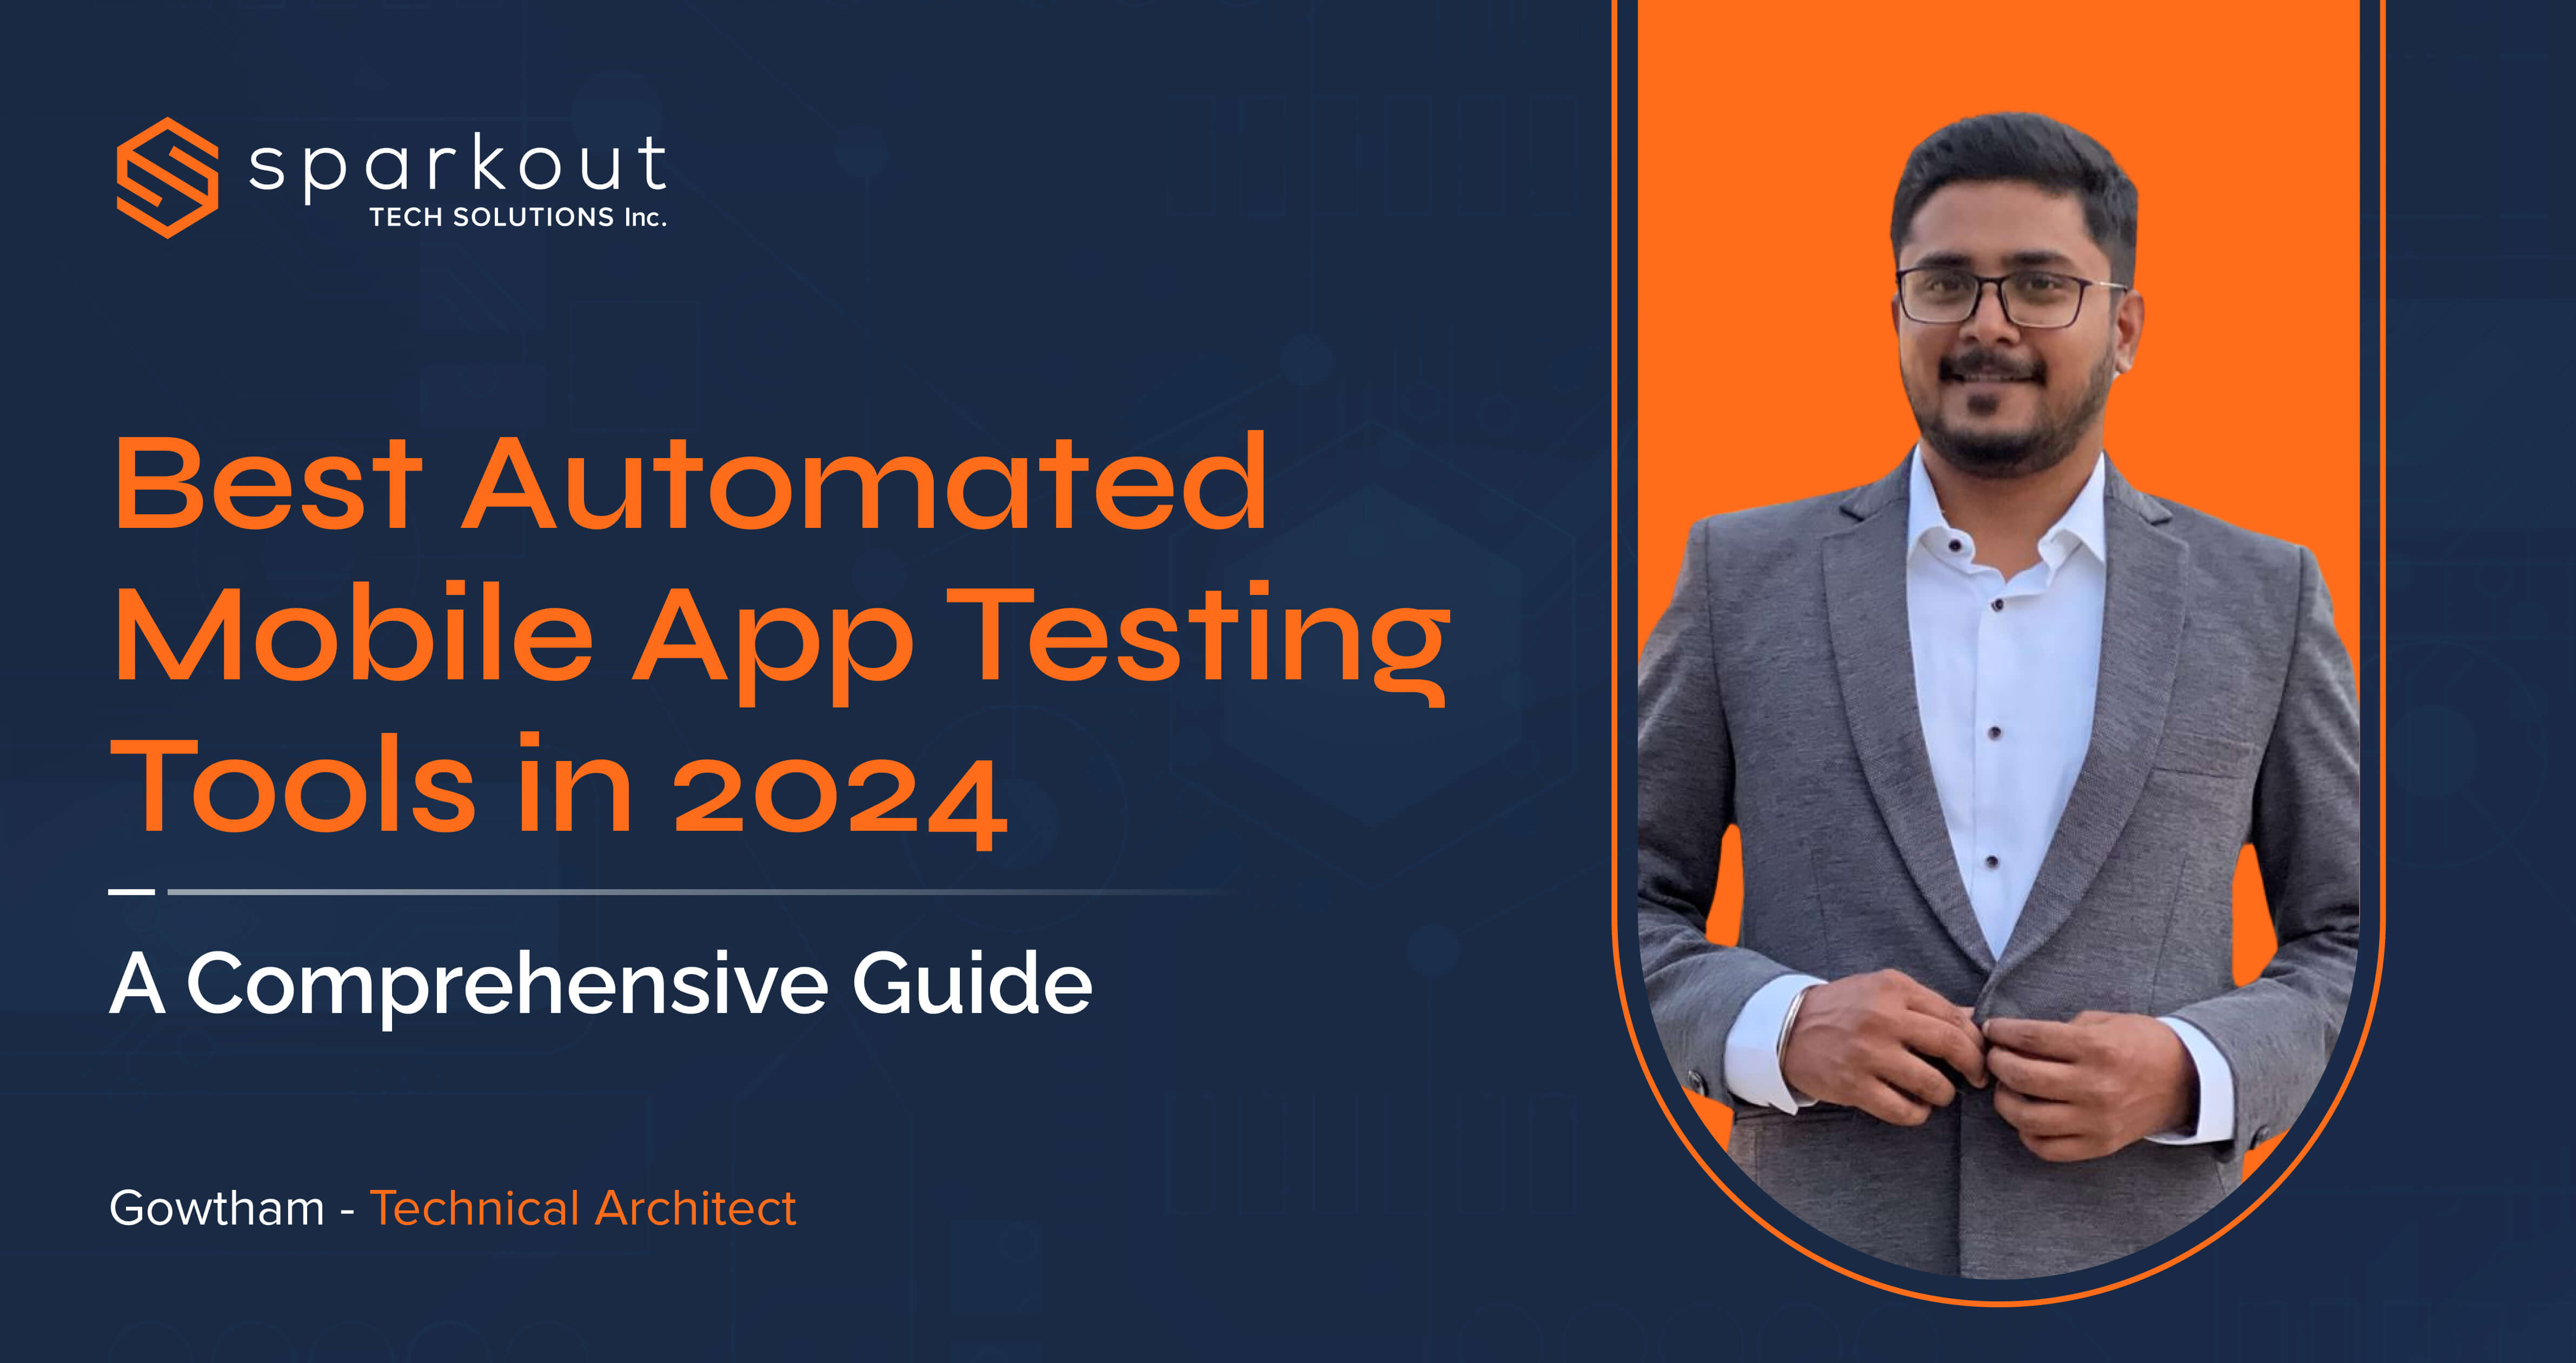 Best Automated Mobile App Testing Tools in 2024